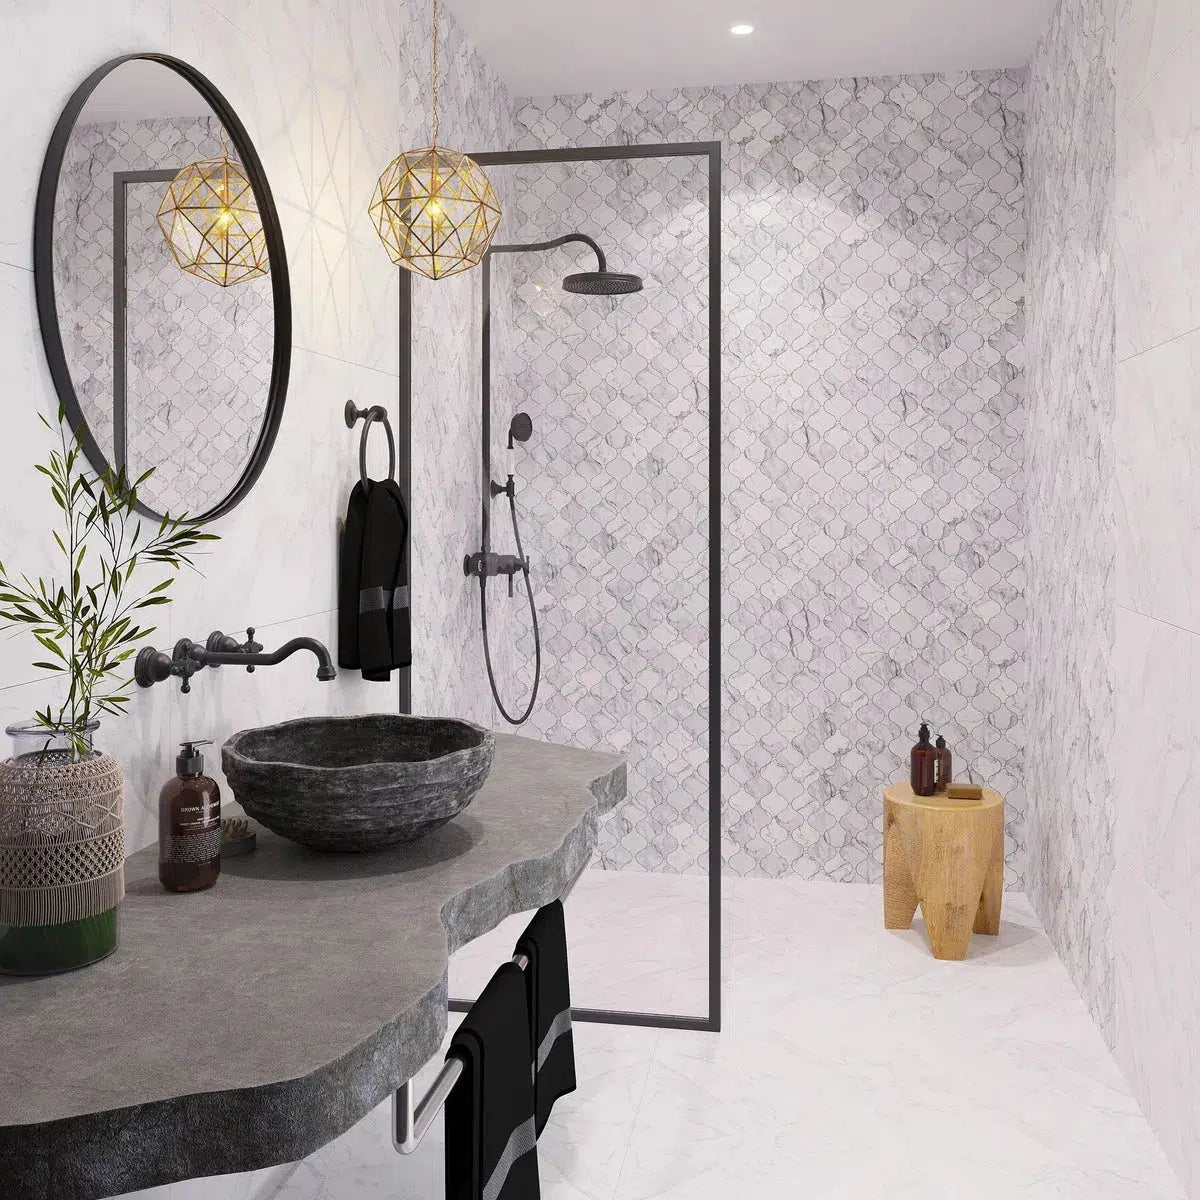 Contemporary bathroom with marble tile wall and iron and wooden textures